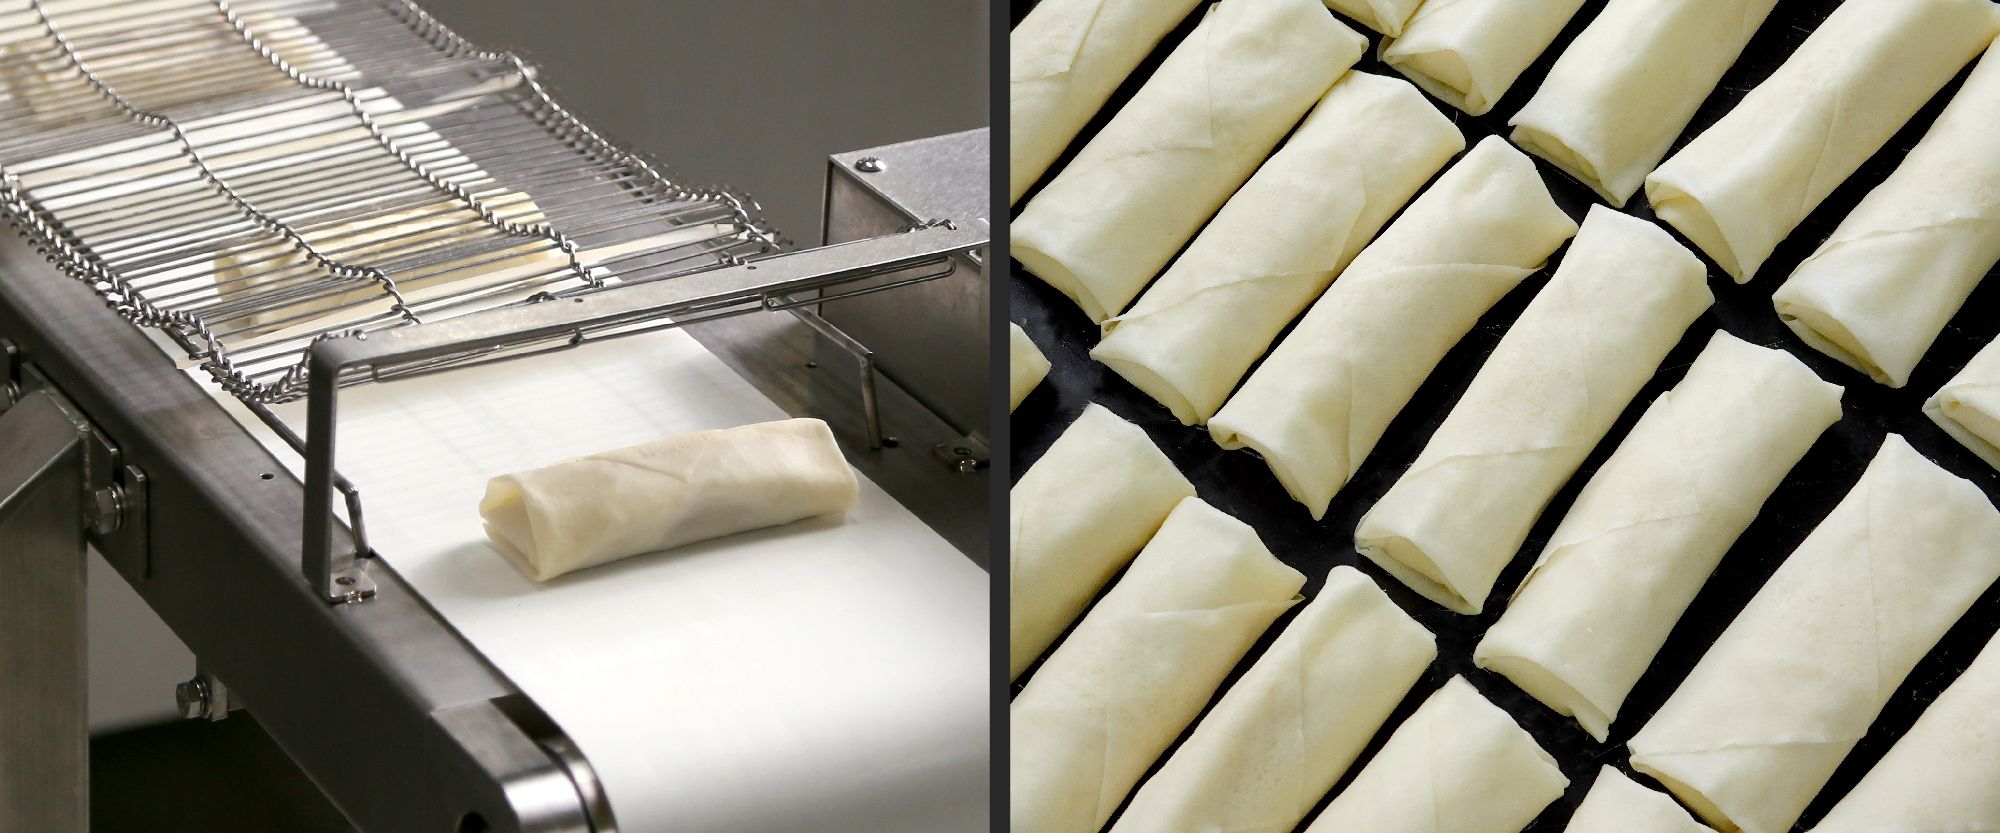 ANKO-spring-roll-production-line